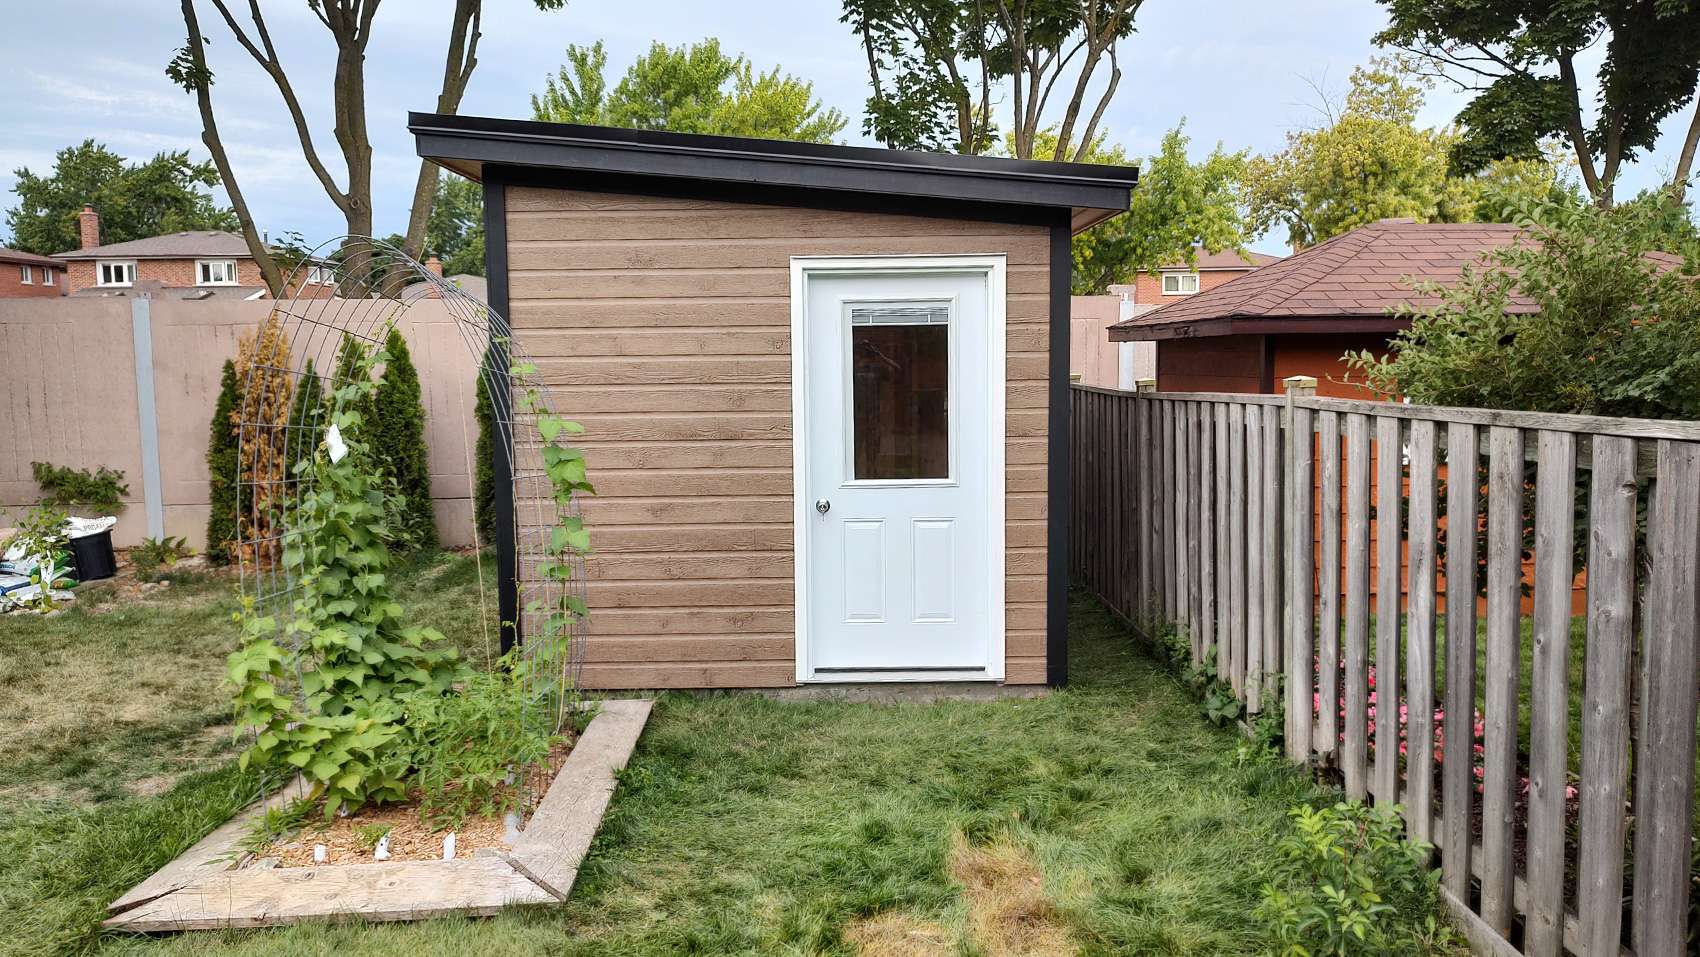 Right side view of 9’ x 11’ Urban Studio home studio located in Mississauga, Ontario – Summerw